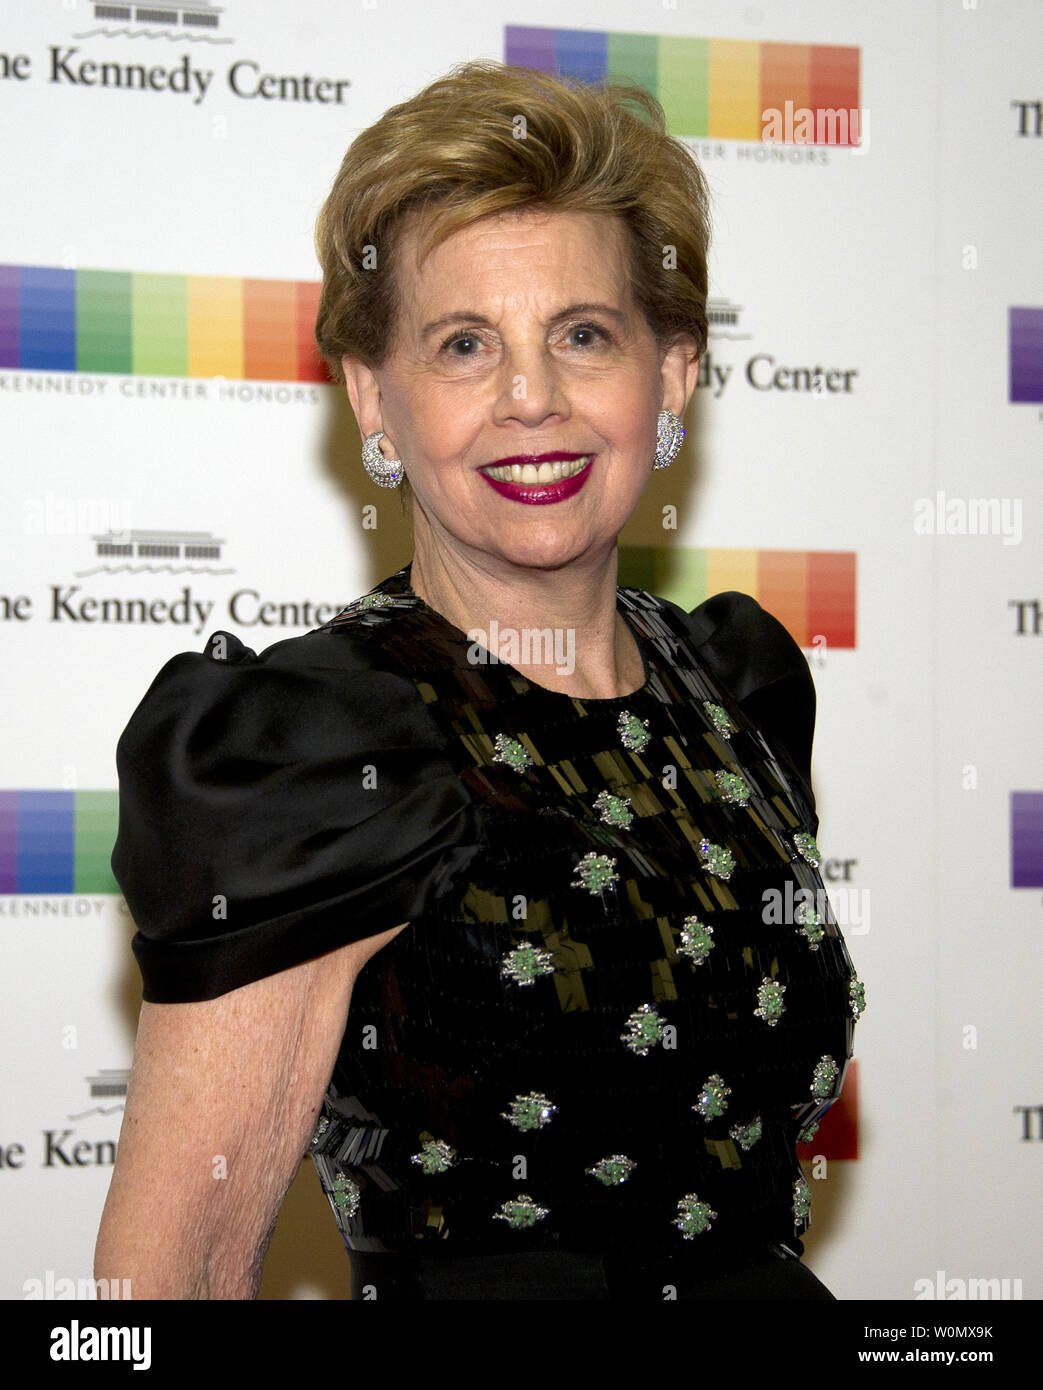 Adrienne Arsht arrives for the formal Artist's Dinner honoring the recipients of the 40th Annual Kennedy Center Honors hosted by United States Secretary of State Rex Tillerson at the US Department of State in Washington, D.C. on Saturday, December 2, 2017. The 2017 honorees are: American dancer and choreographer Carmen de Lavallade; Cuban American singer-songwriter and actress Gloria Estefan; American hip hop artist and entertainment icon LL COOL J; American television writer and producer Norman Lear; and American musician and record producer Lionel Richie.  Photo by Ron Sachs/UPI Stock Photo